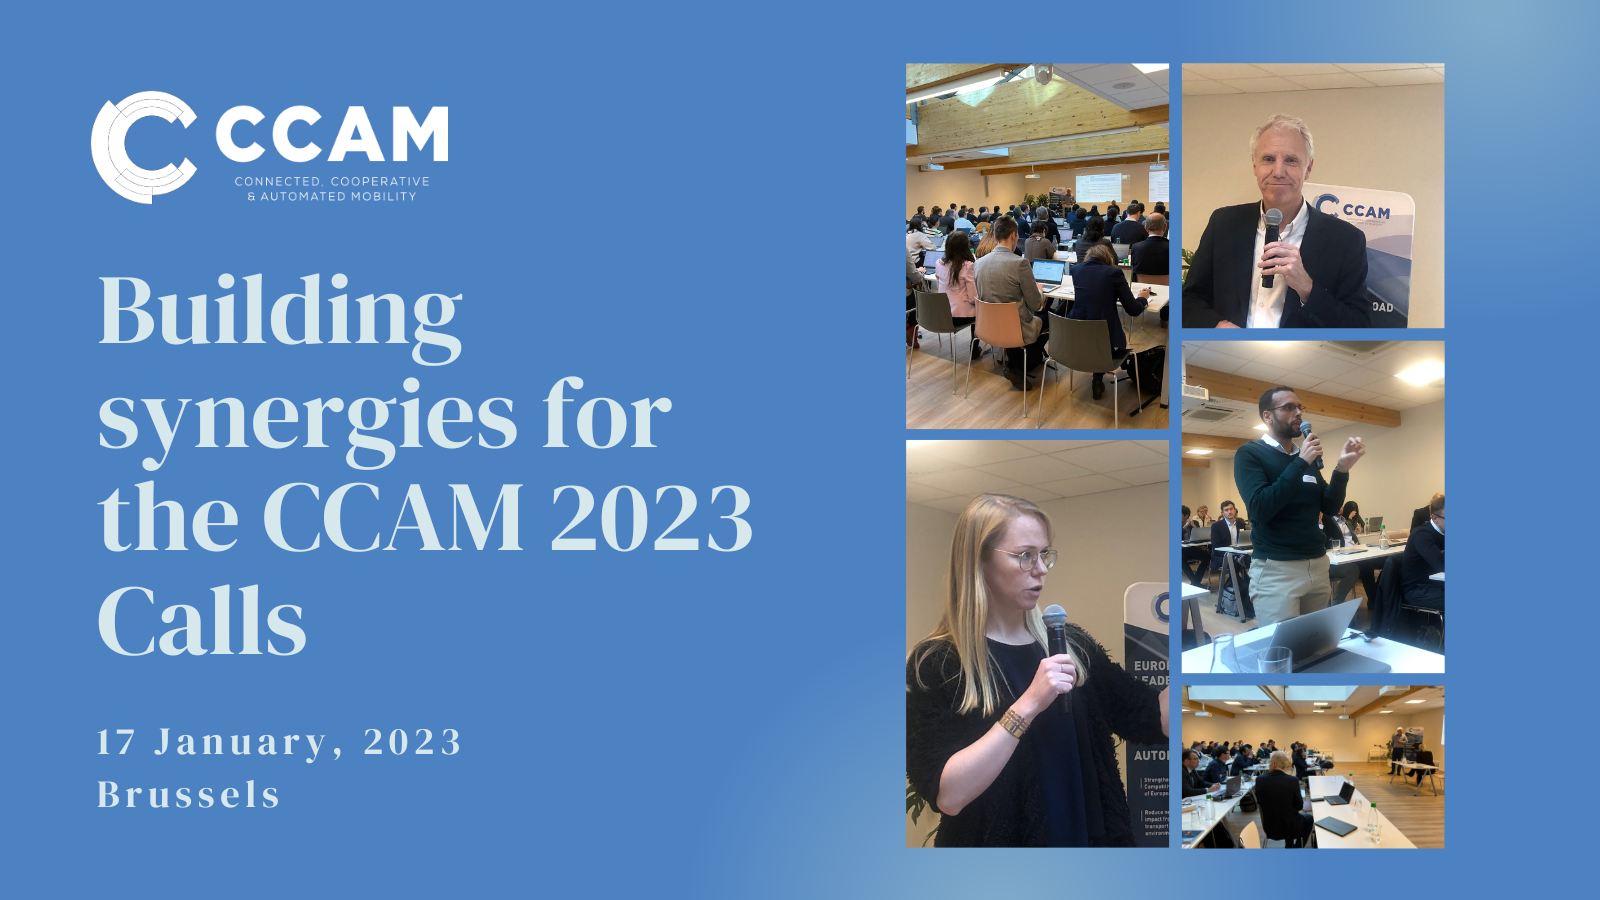 Building synergies for the CCAM 2023 Calls